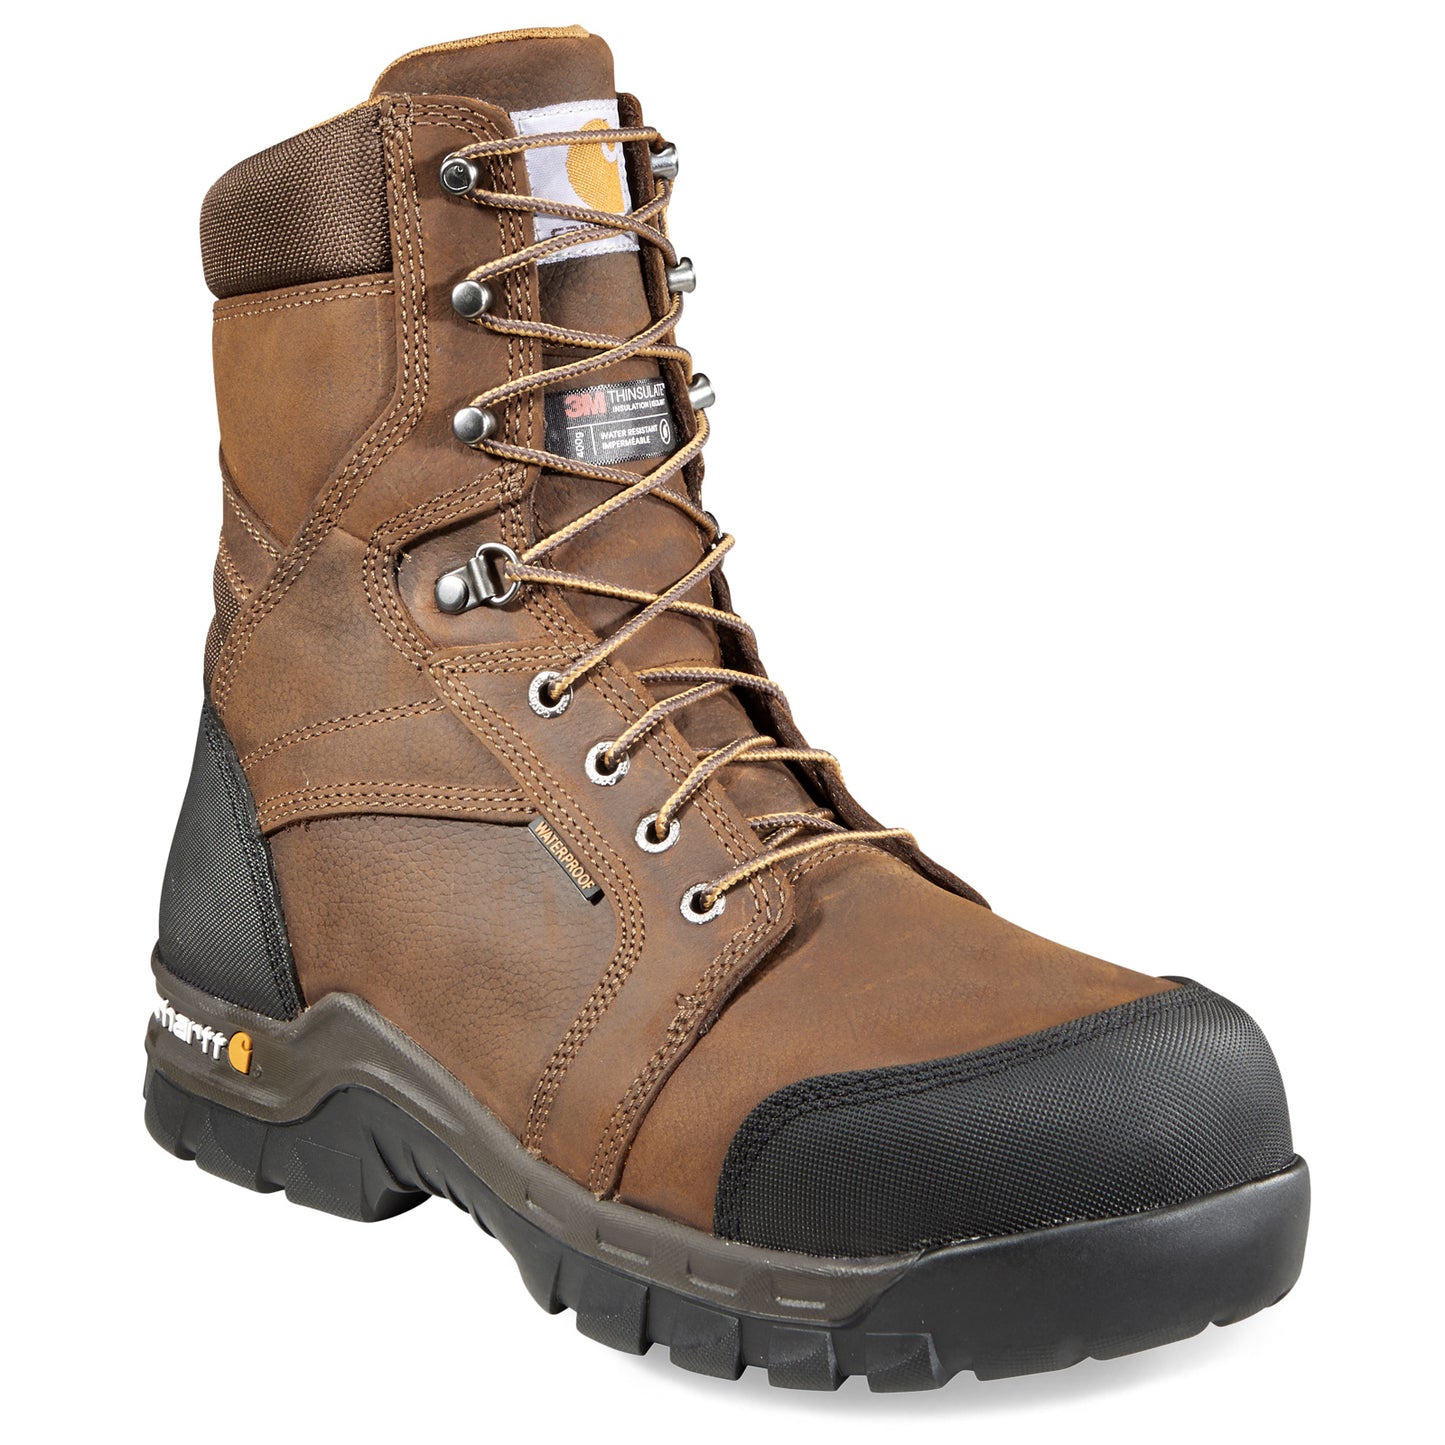 Peltz Shoes  Men's Carhartt Rugged Flex WP Ins 8in CT Work Boot BROWN OILED CMF8389